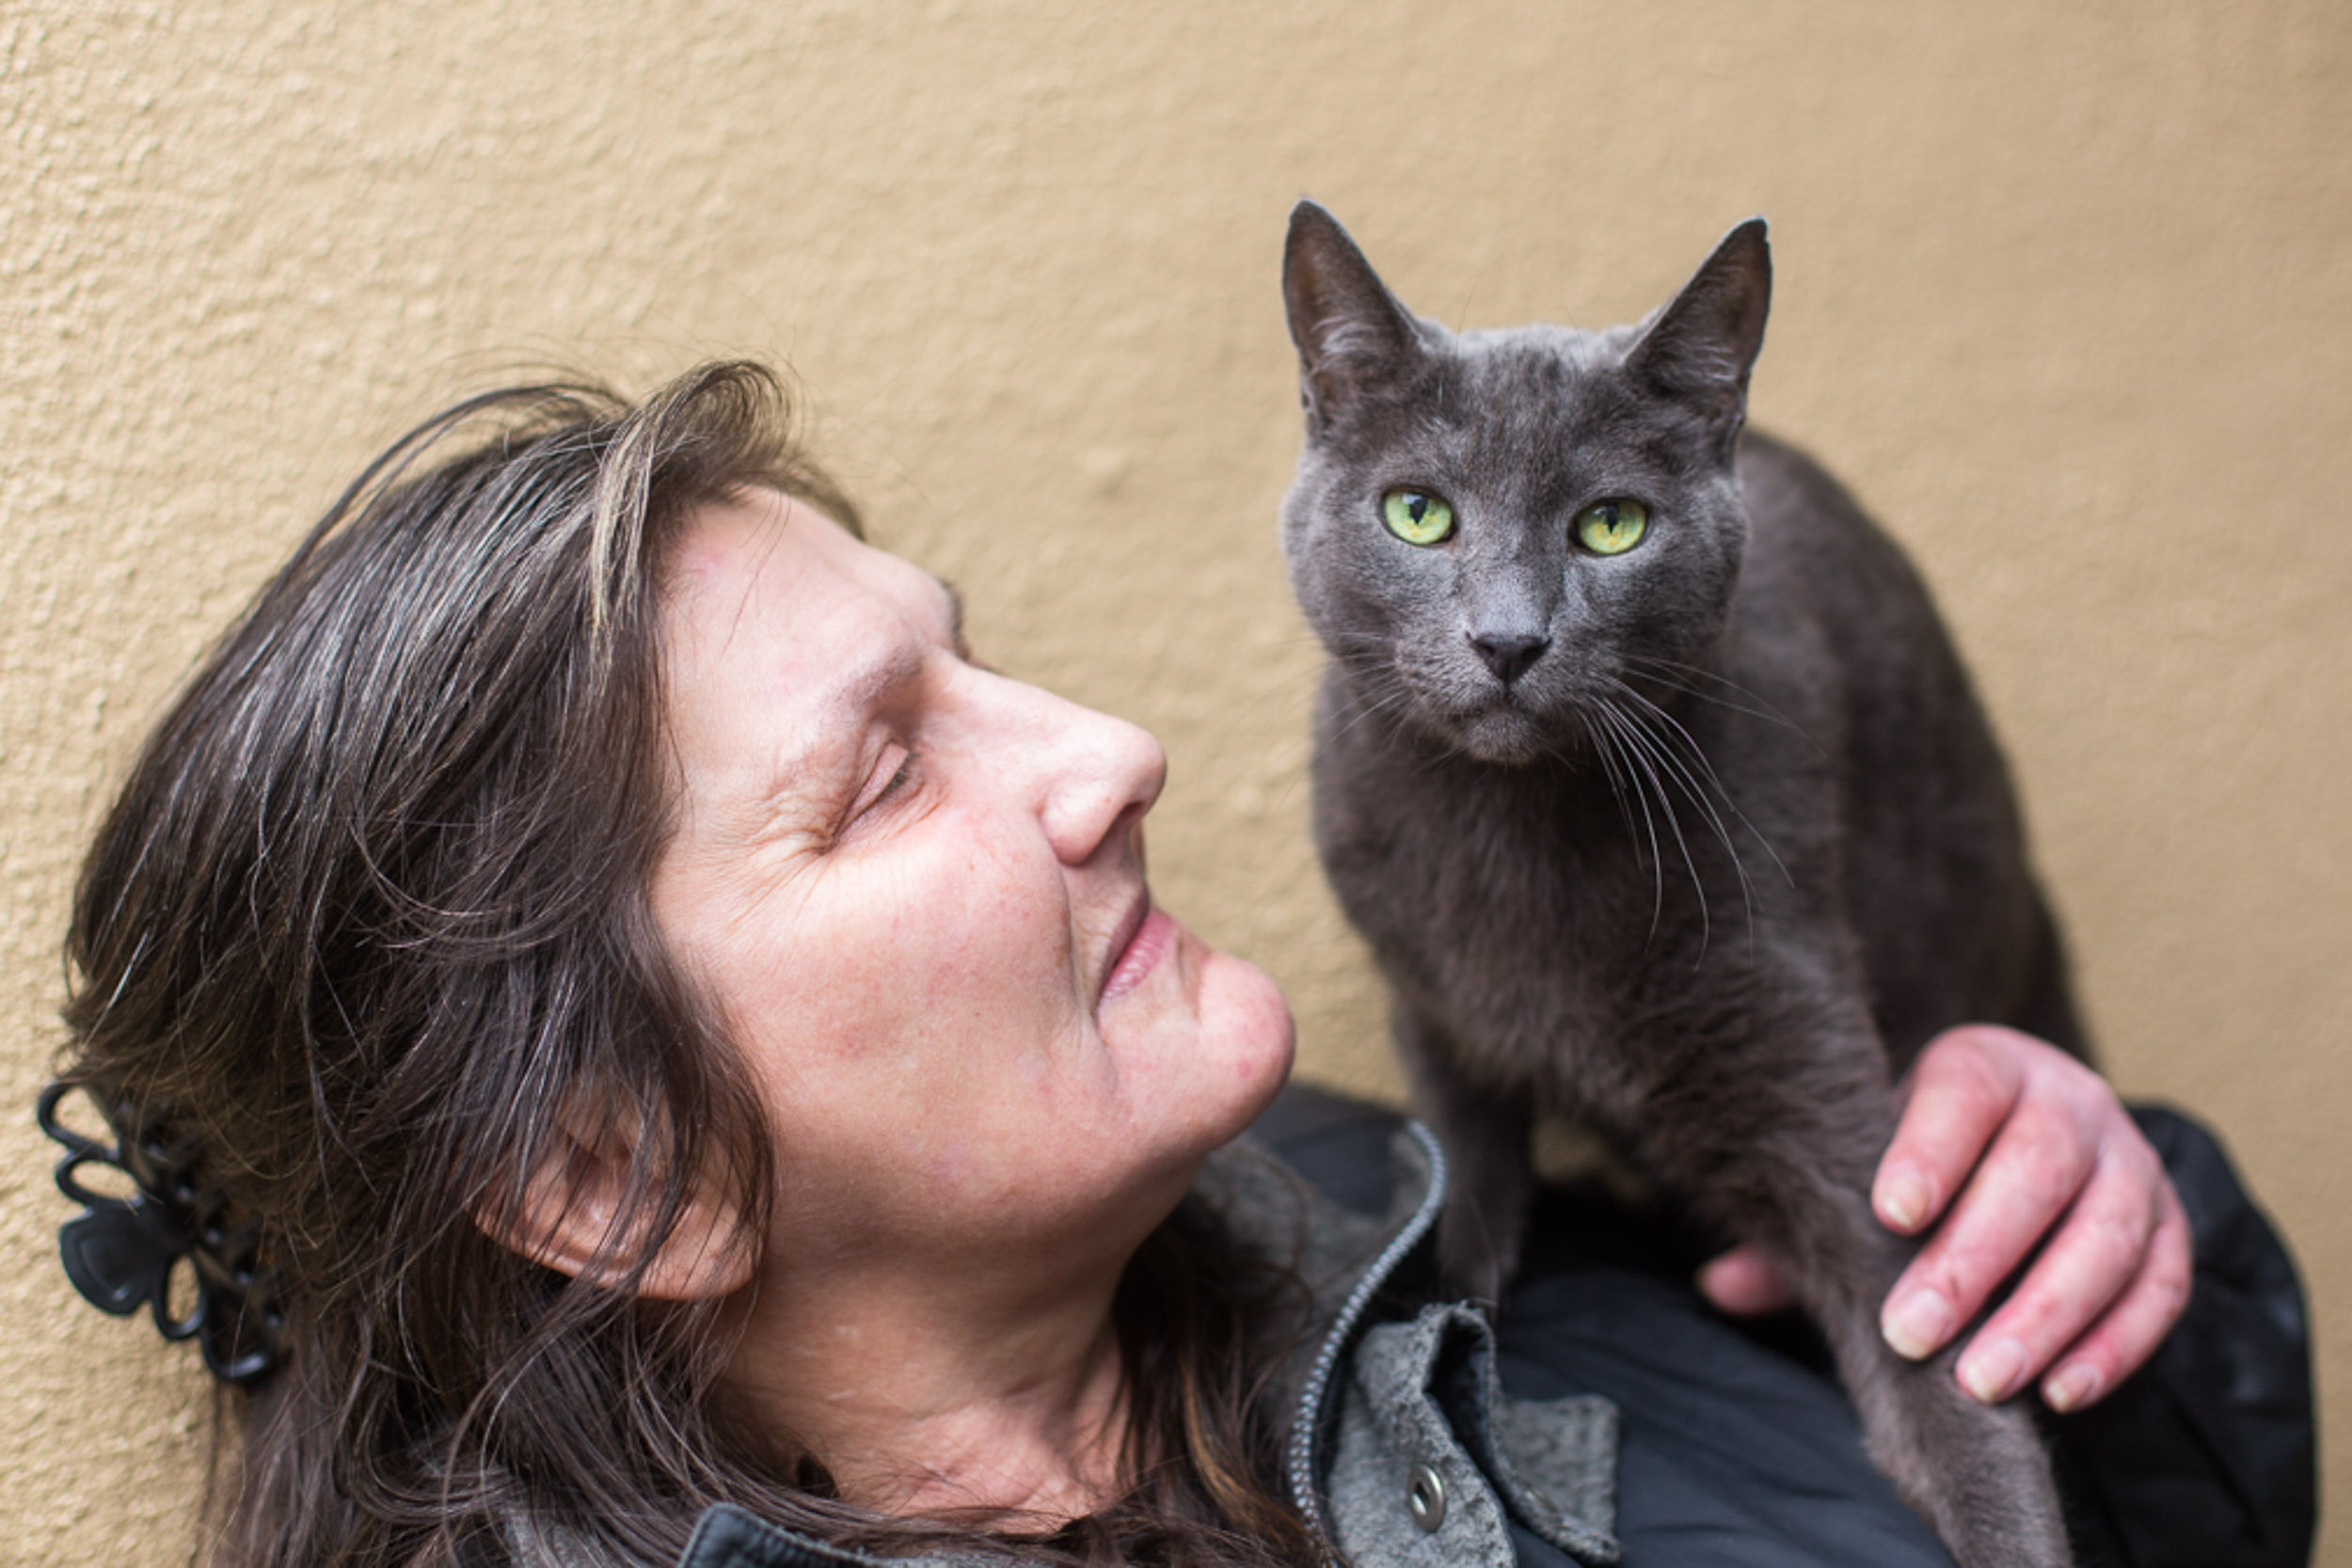 Pet and People Photography | Homeless Woman with Cat by Mark Rogers